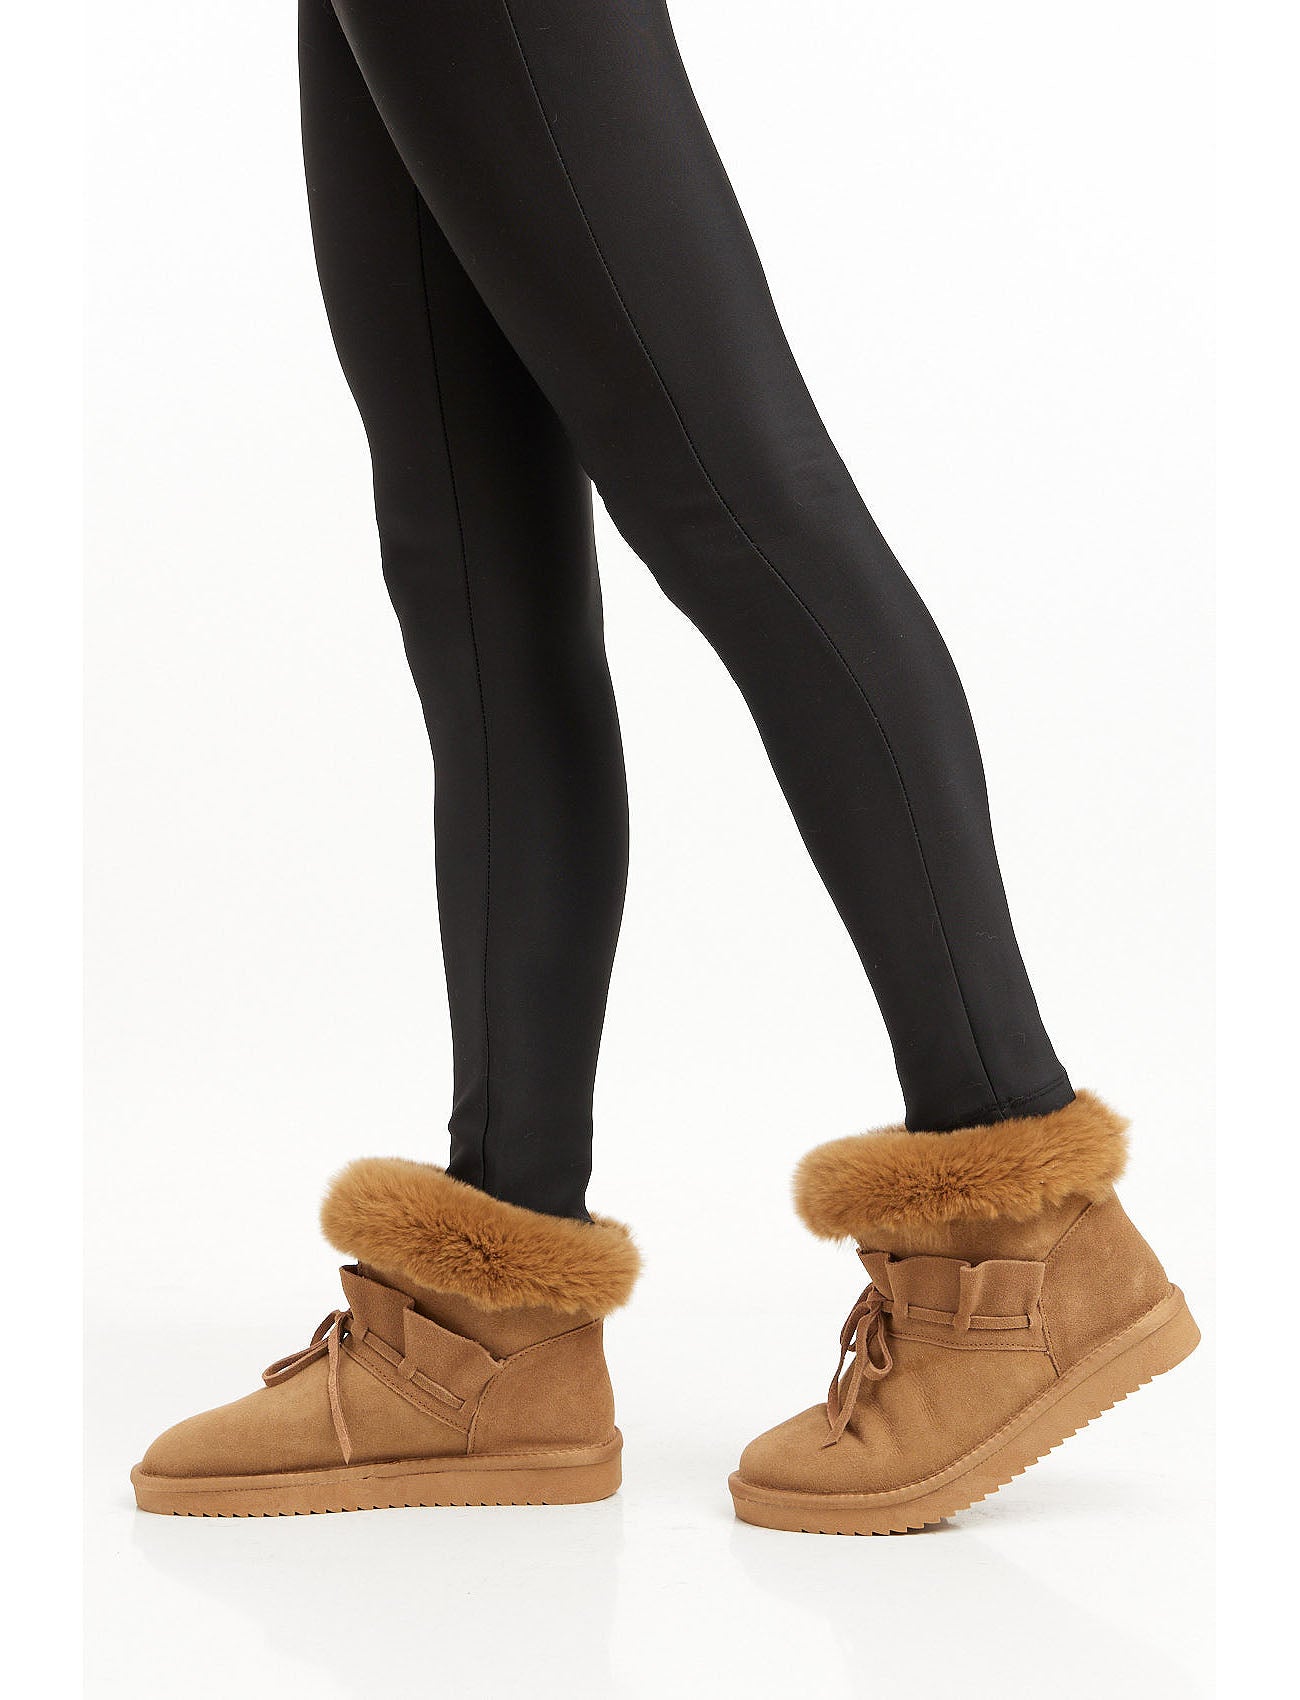 Lambskin ankle boots - camel